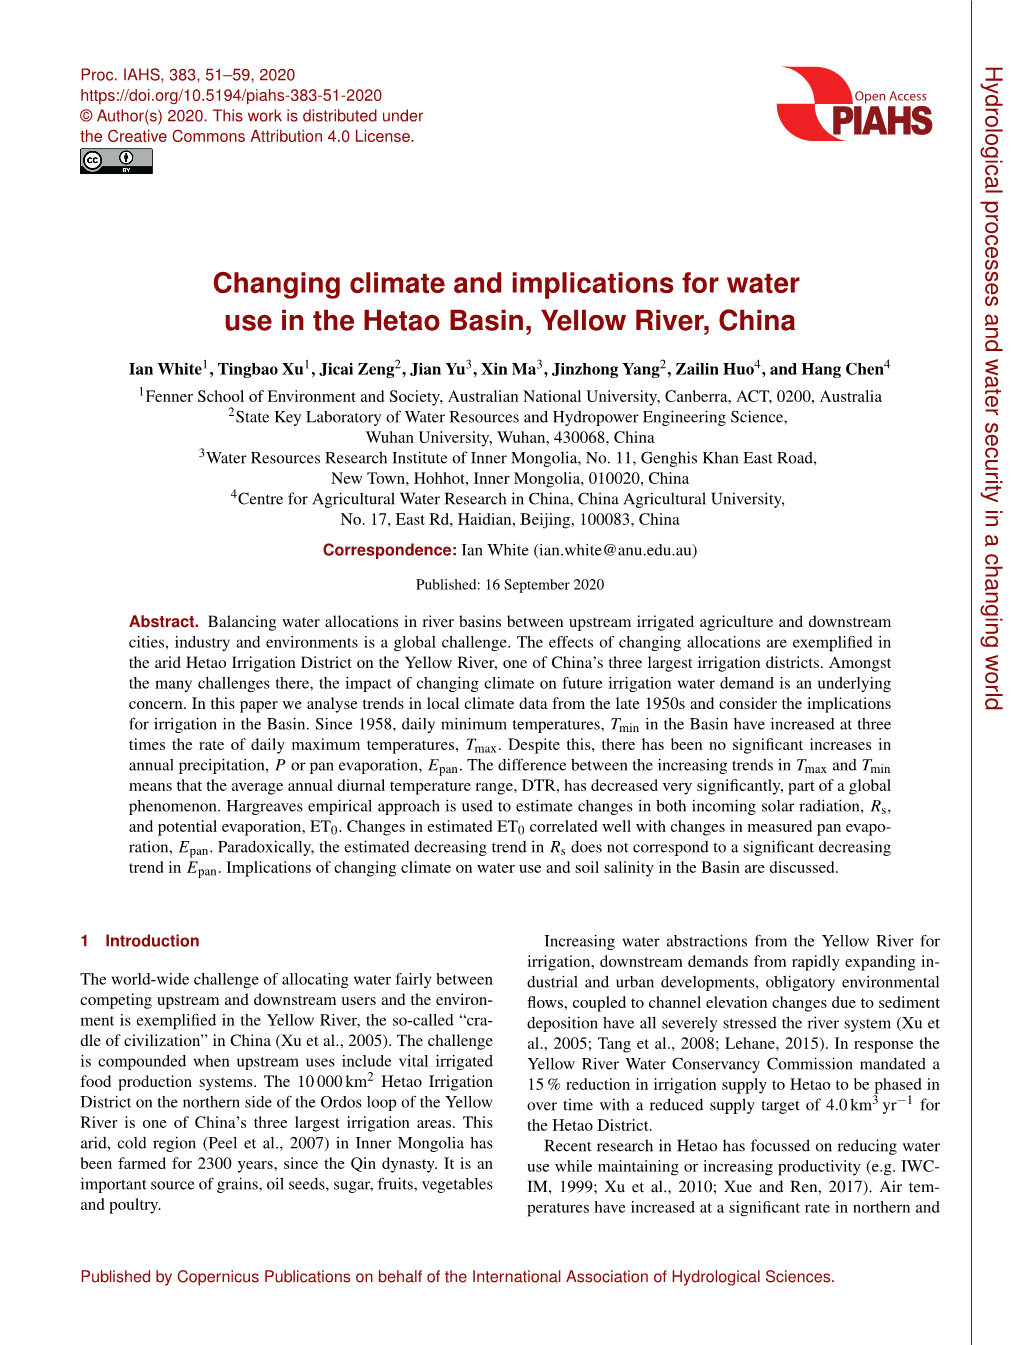 Changing Climate and Implications for Water Use in the Hetao Basin, Yellow River, China